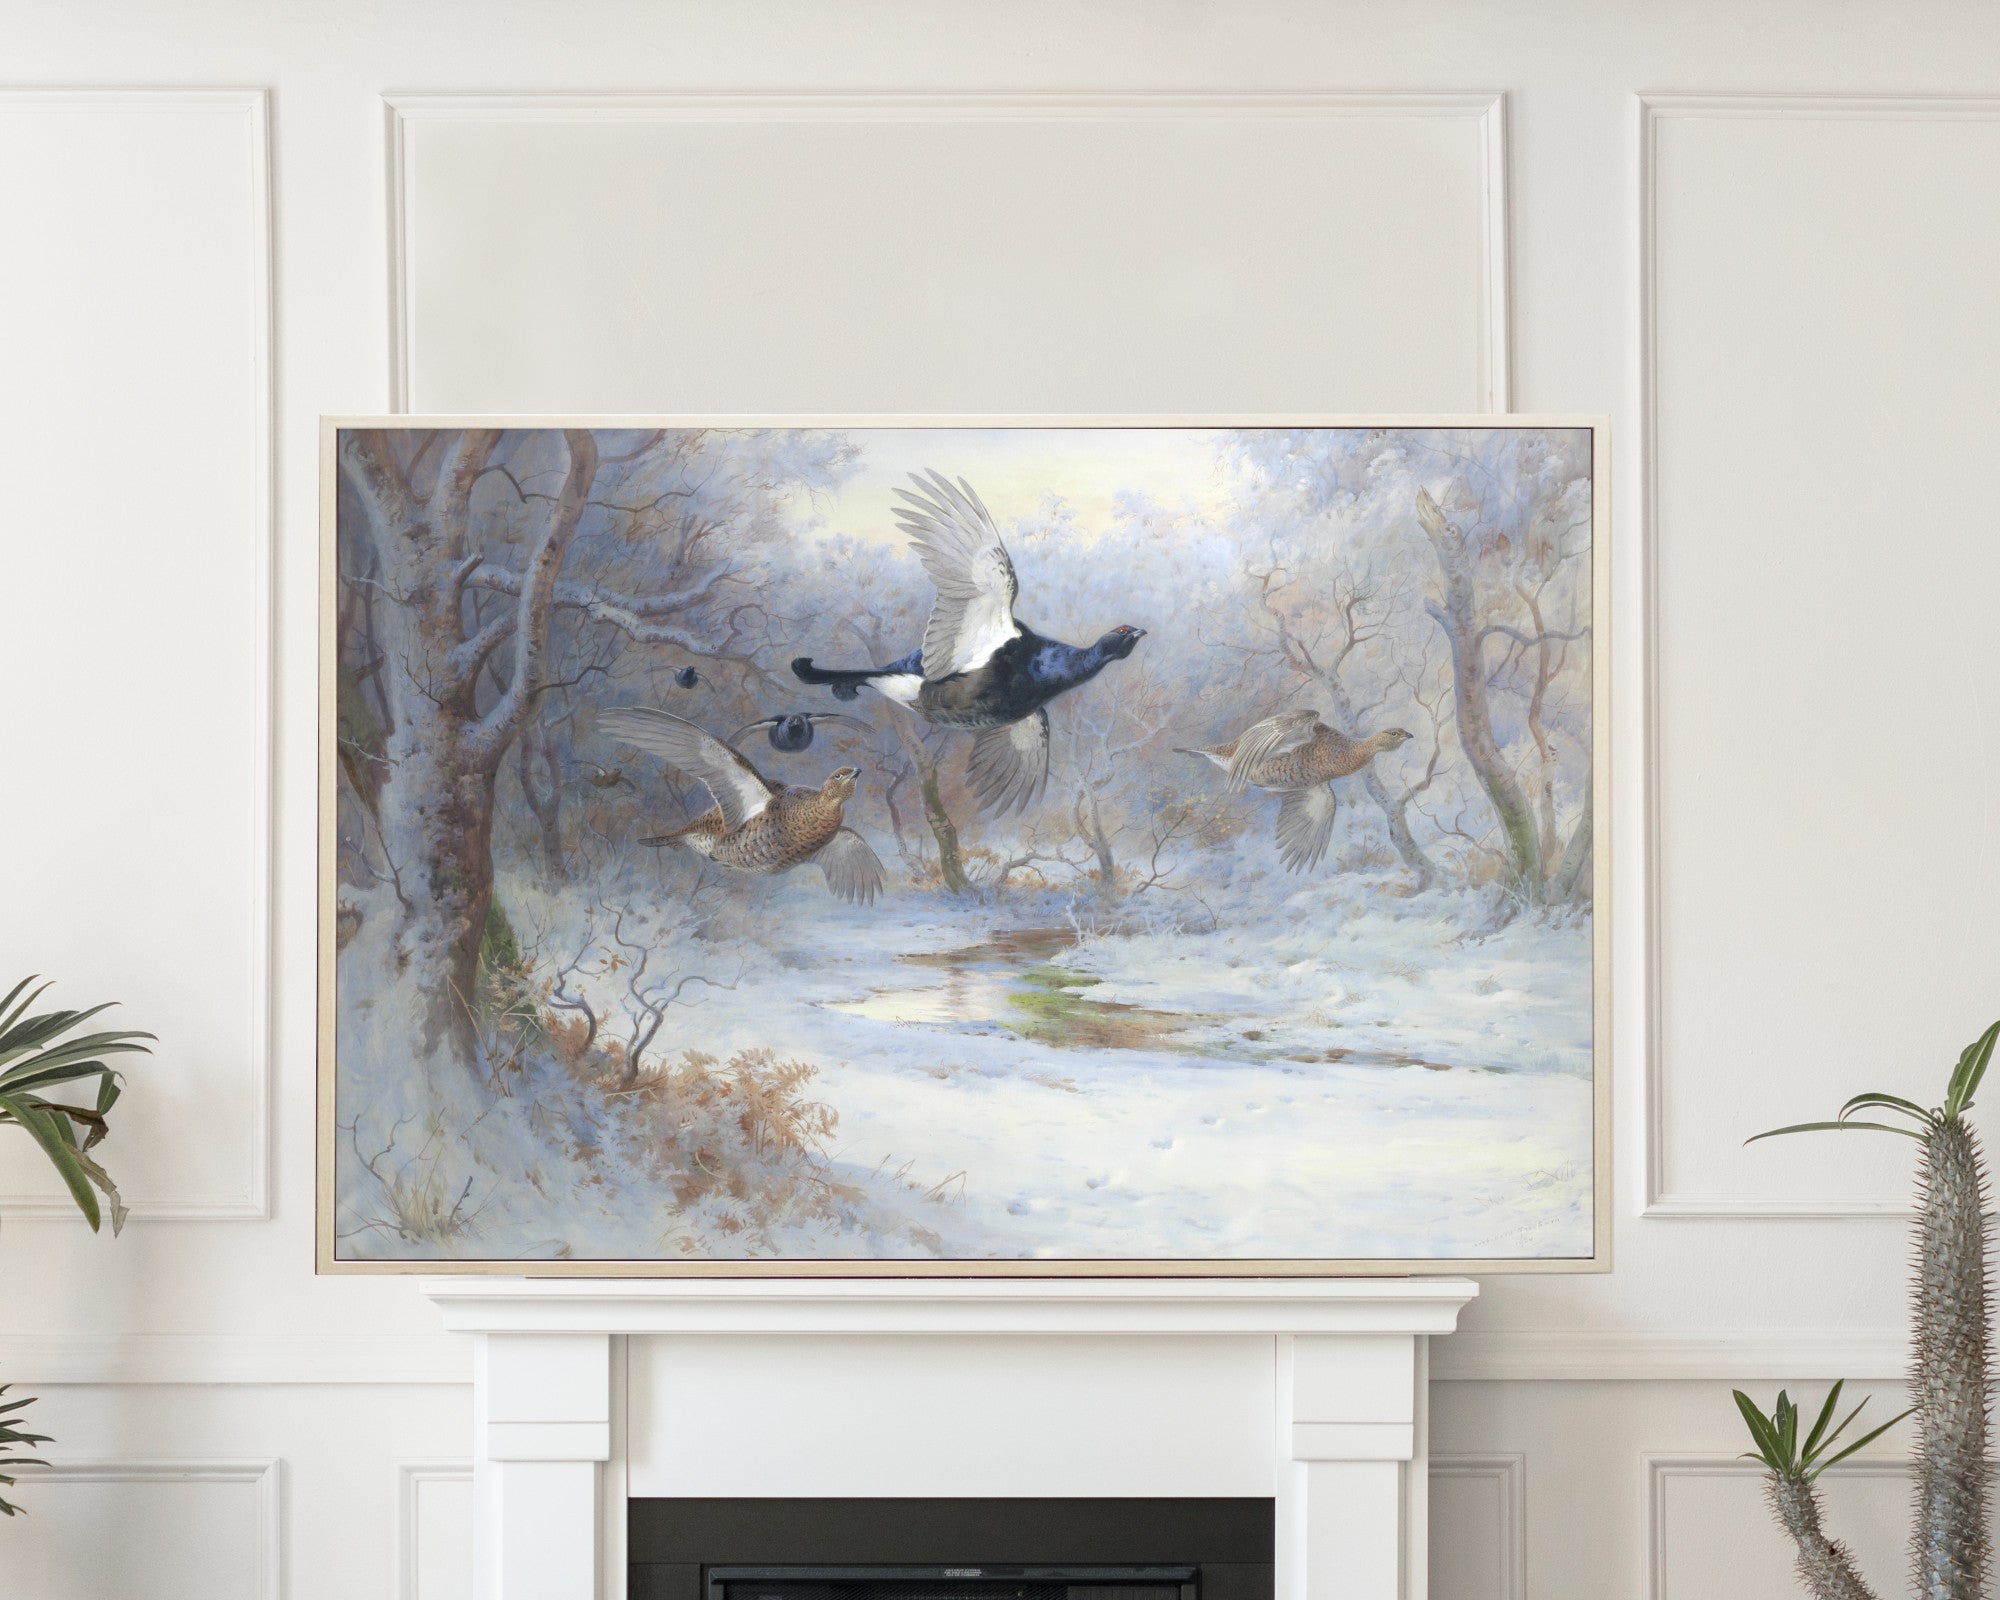 Blackcock And Grouse In Flight – Winter, Archibald Thorburn, Birds Print